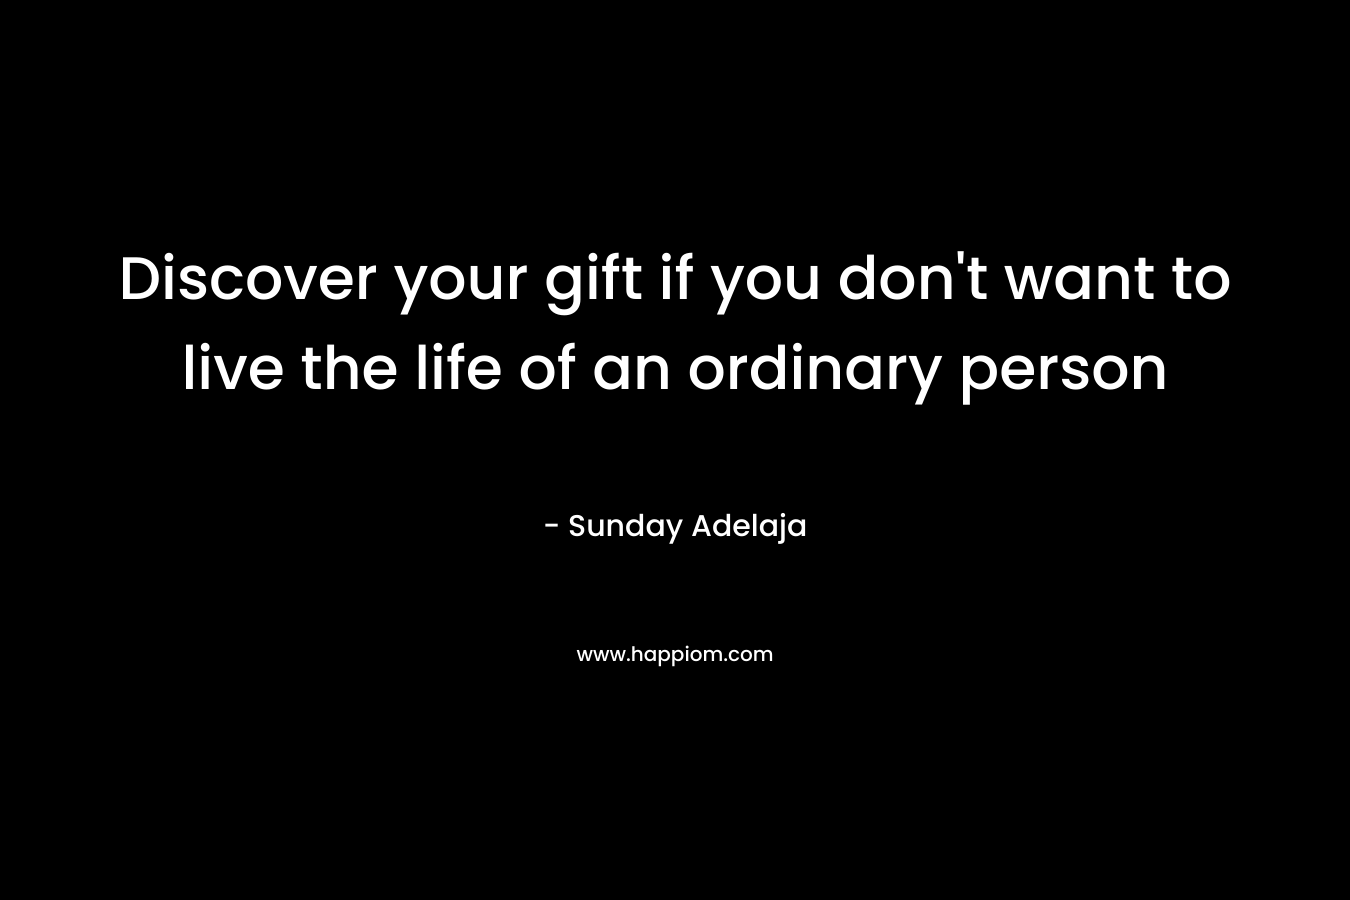 Discover your gift if you don't want to live the life of an ordinary person